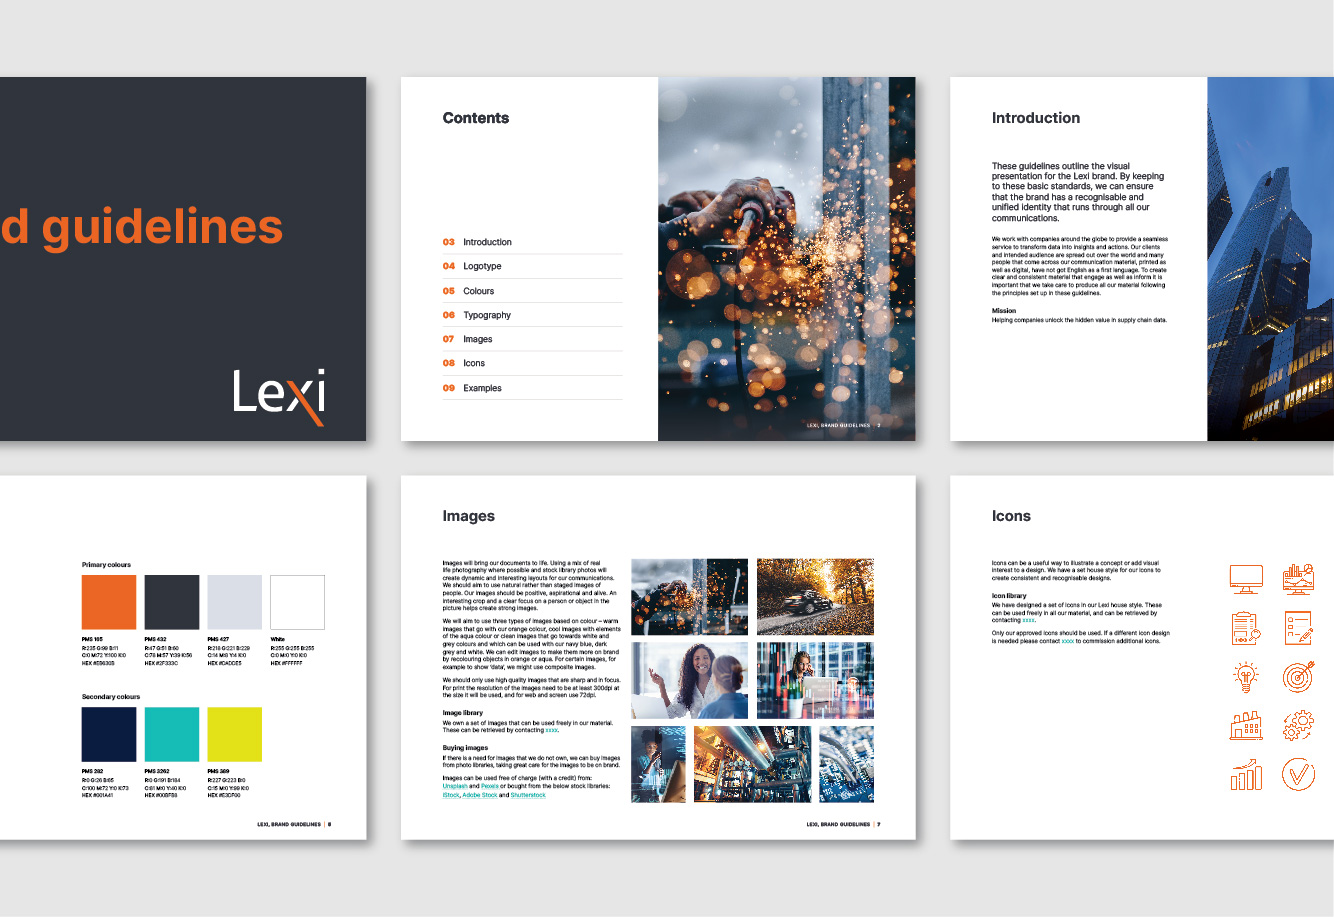 Lexi brand guidelines